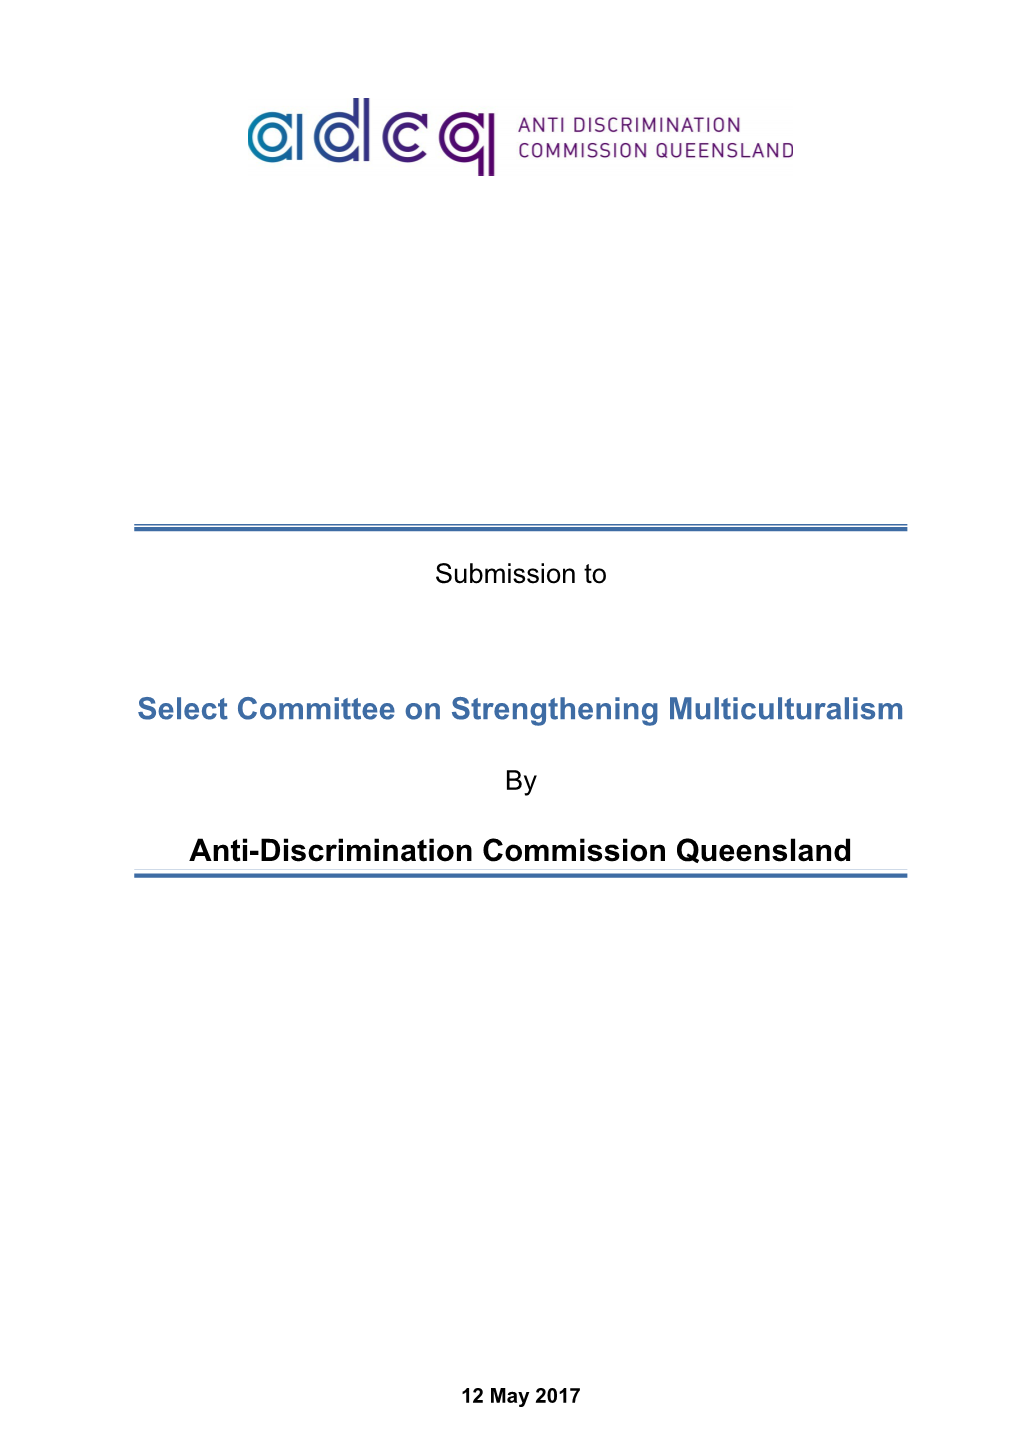 Select Committee on Strengthening Multiculturalism